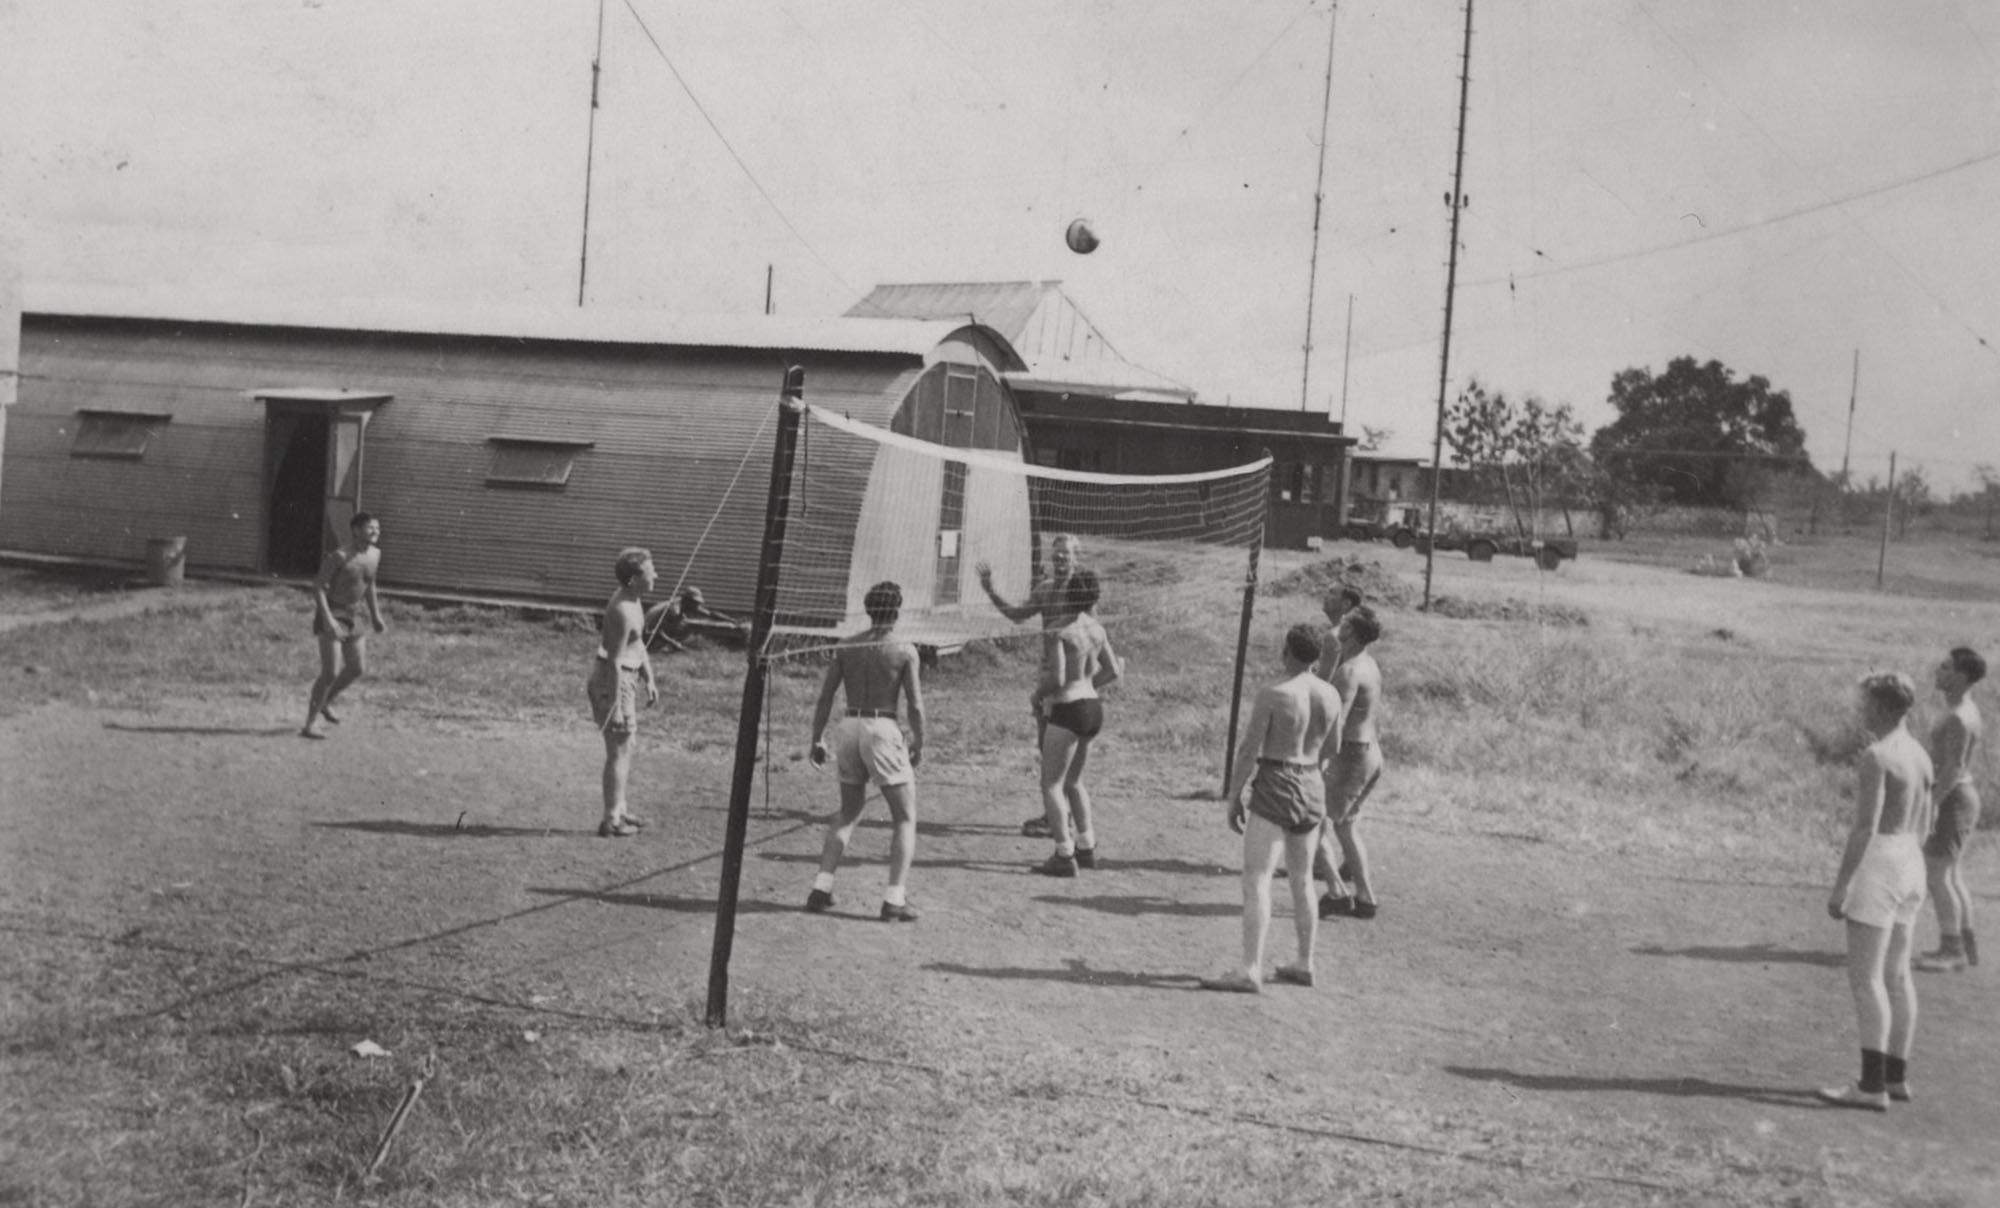 Sailors playing volleyball at the barracks on the naval base in Subic Bay, Philippines after the end of WWII. My father, who took this photo, was shipped there after the war ended in 1945 to maintain radar antennas.